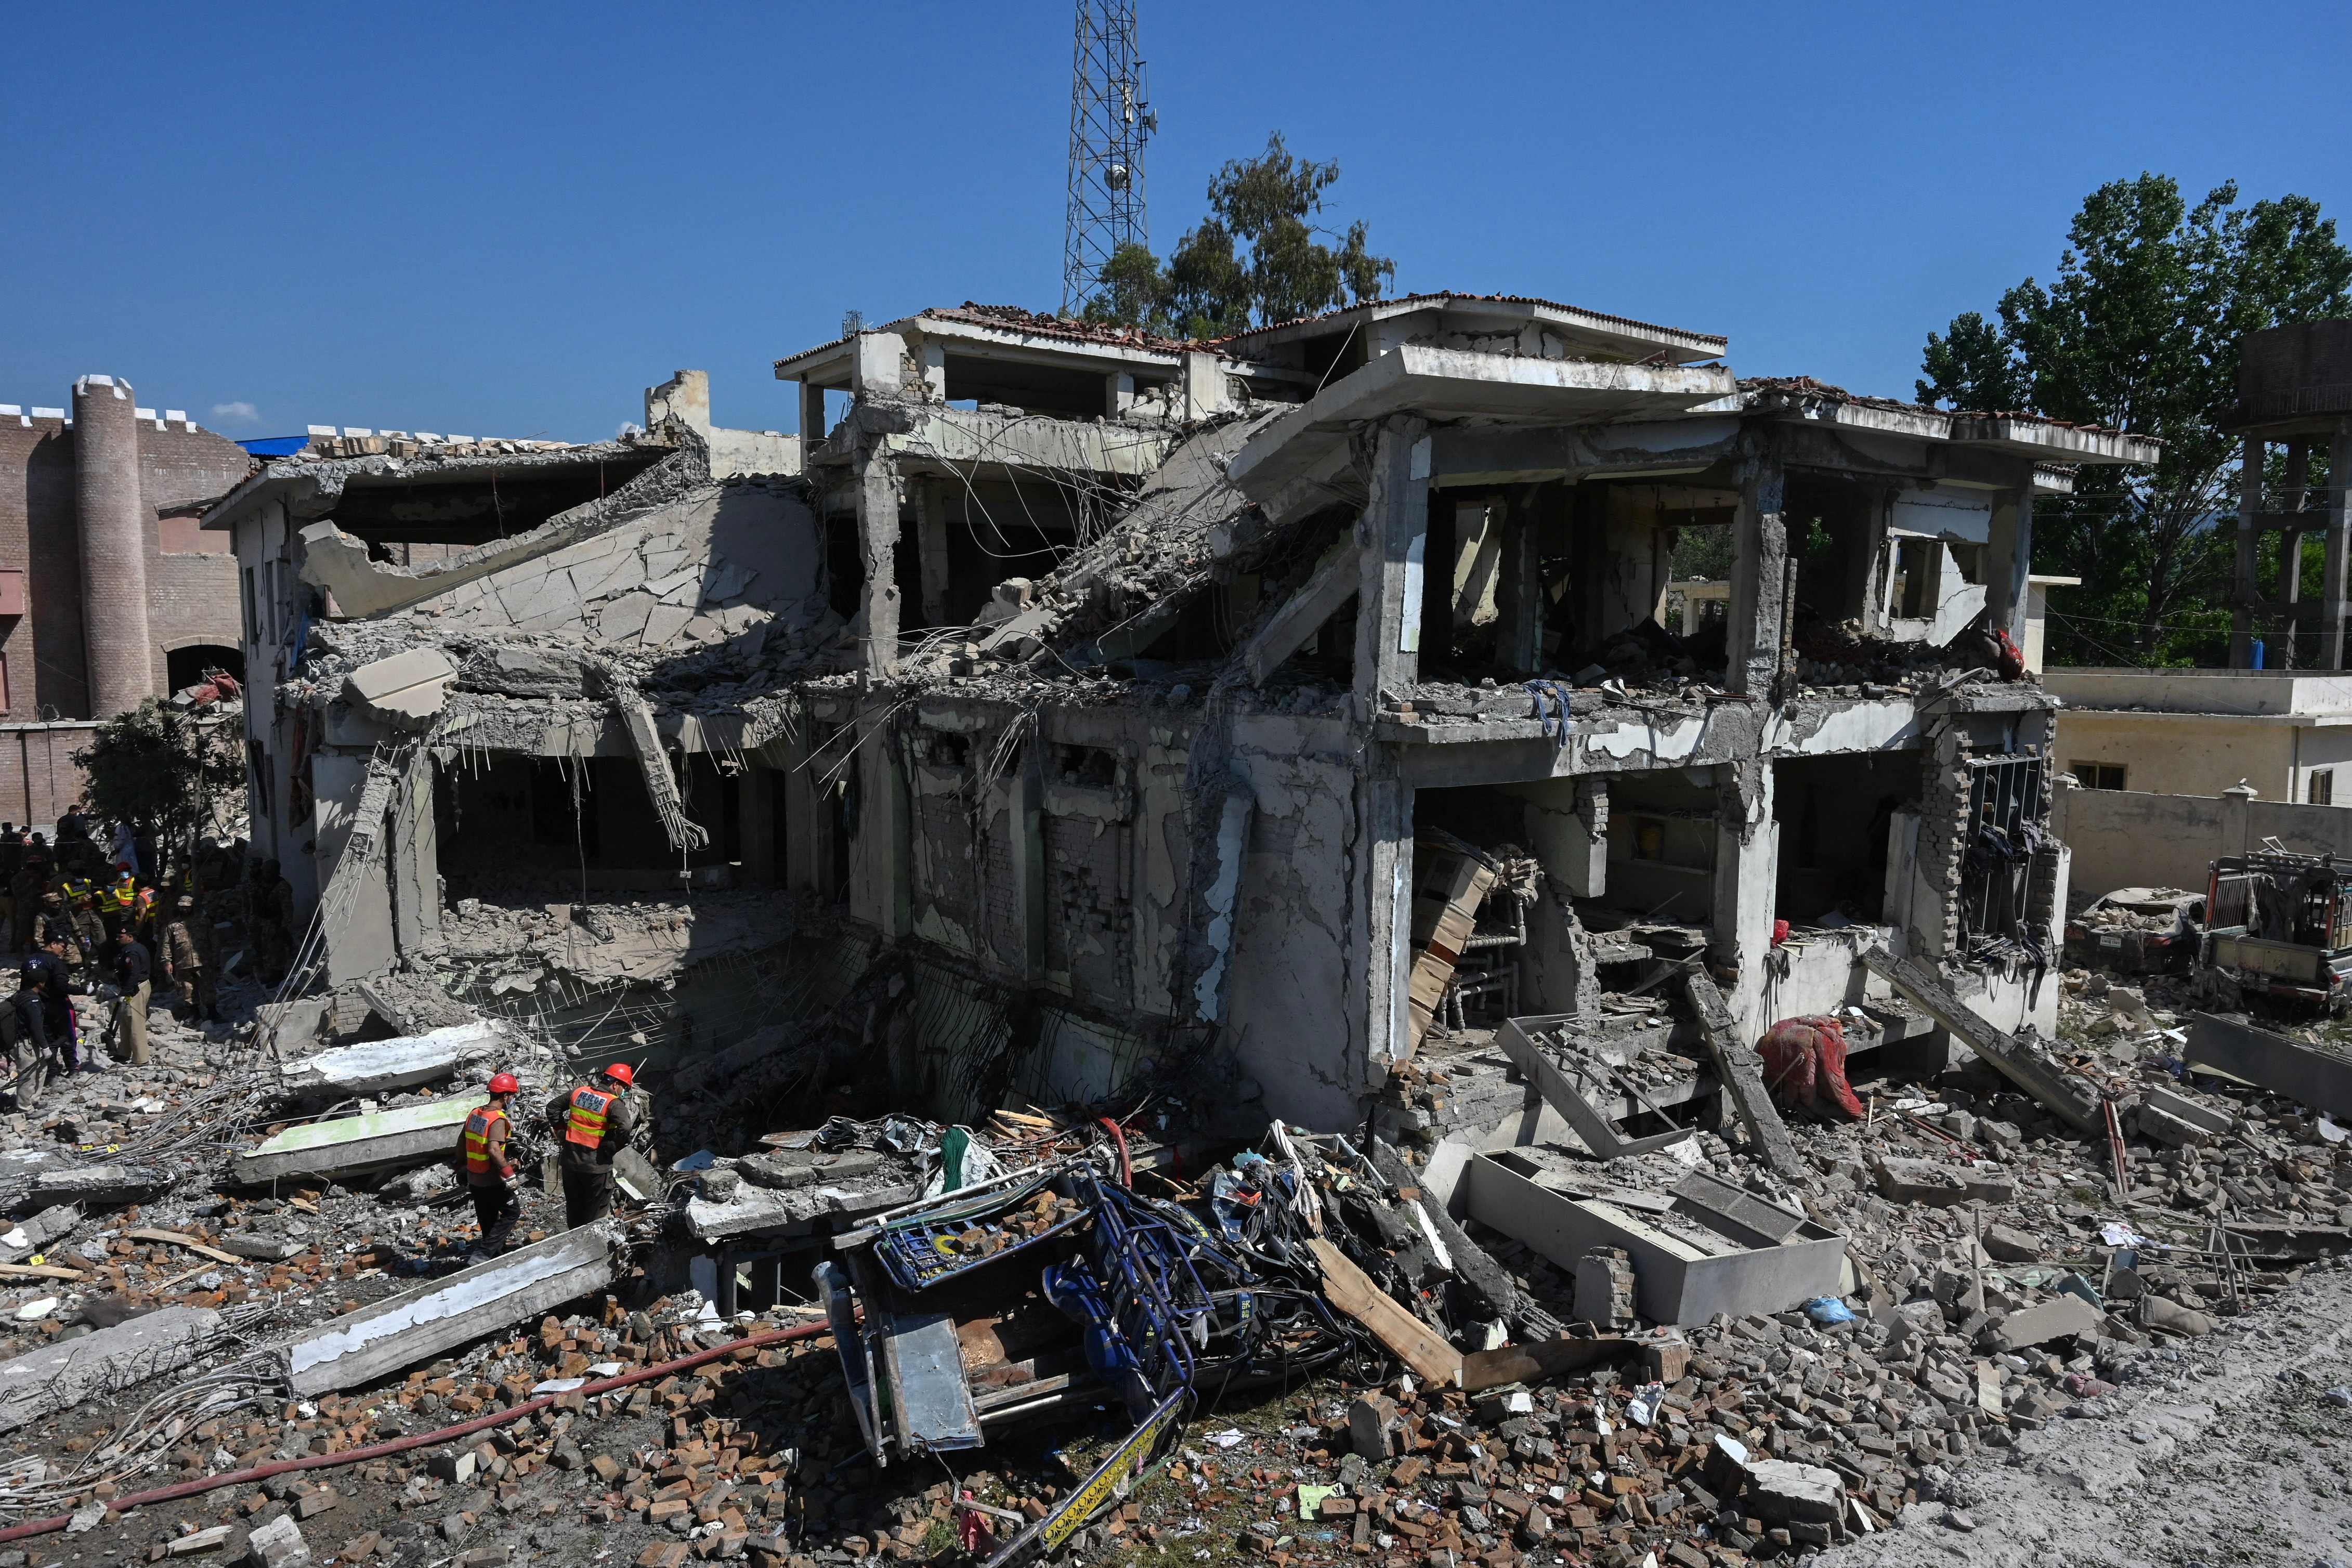 Rescue teams search for victims in the rubble of a badly damaged building a day after multiple explosions caused by fire in a munitions cache levelled a specialist counter-terrorism police station in Kabal